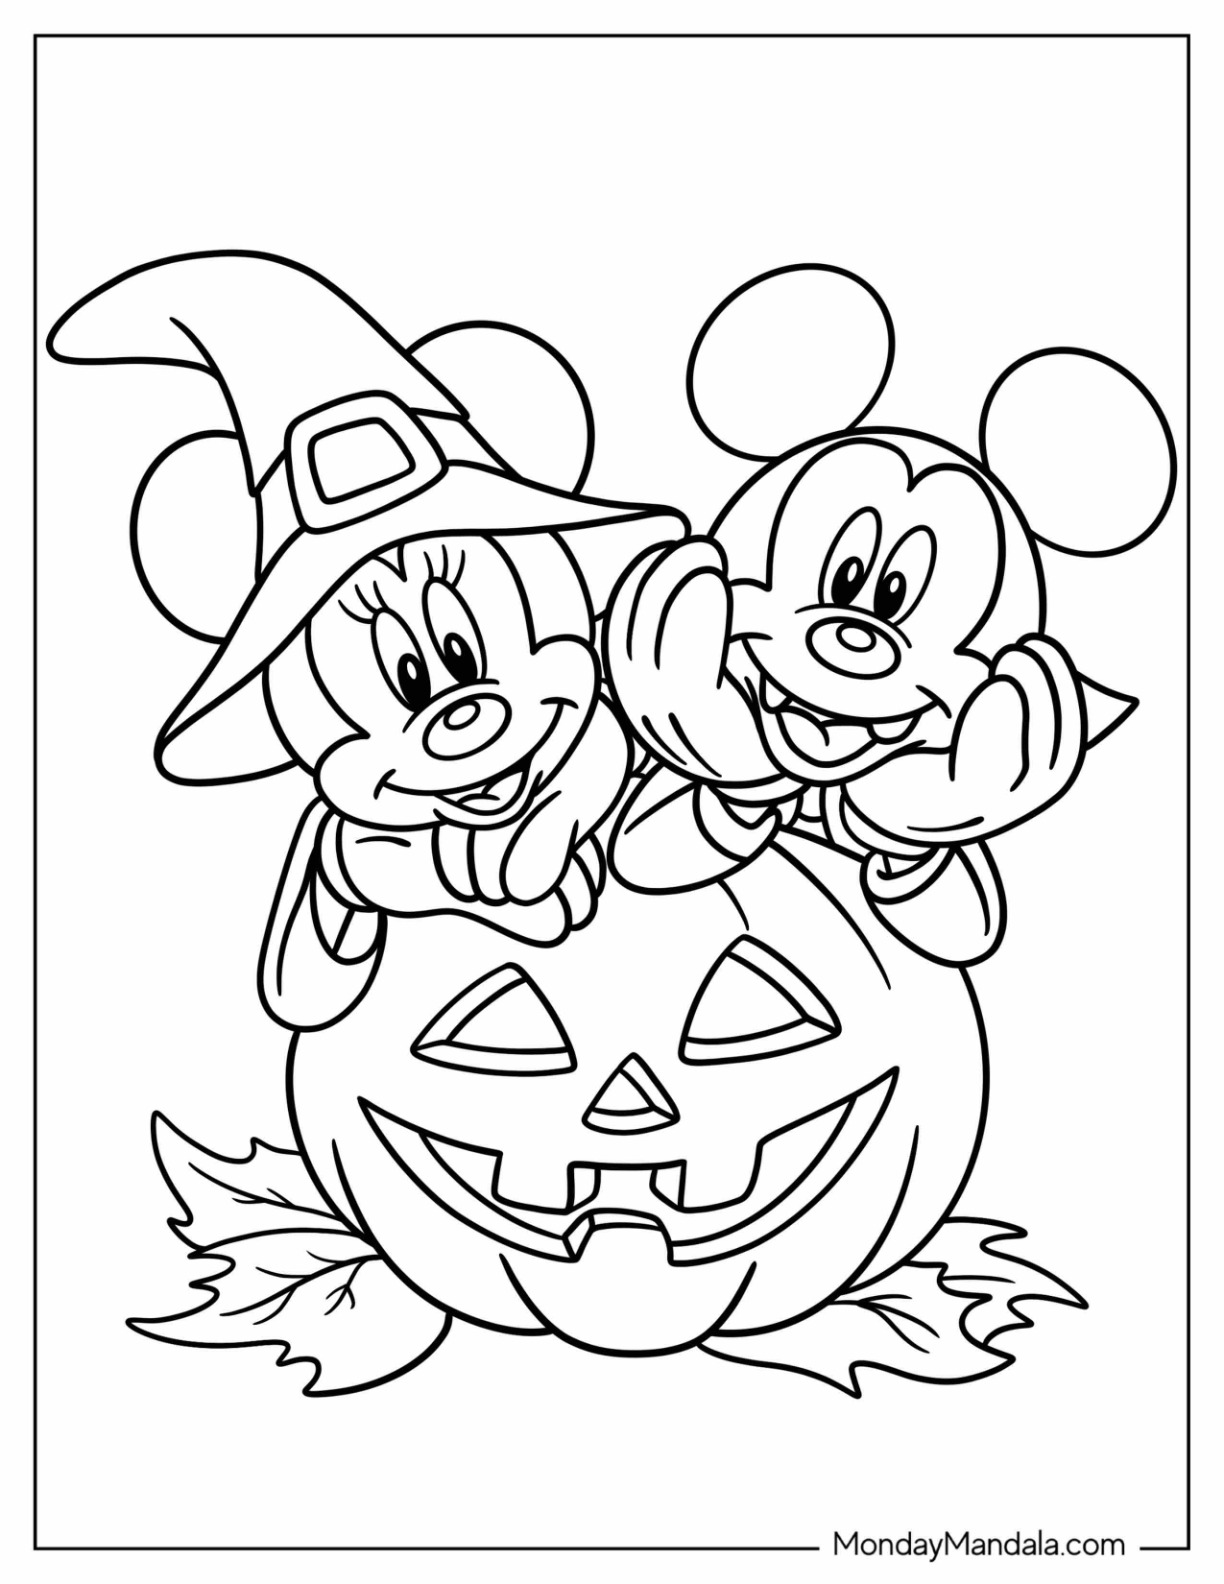 24 Disney Halloween Coloring Pages ...